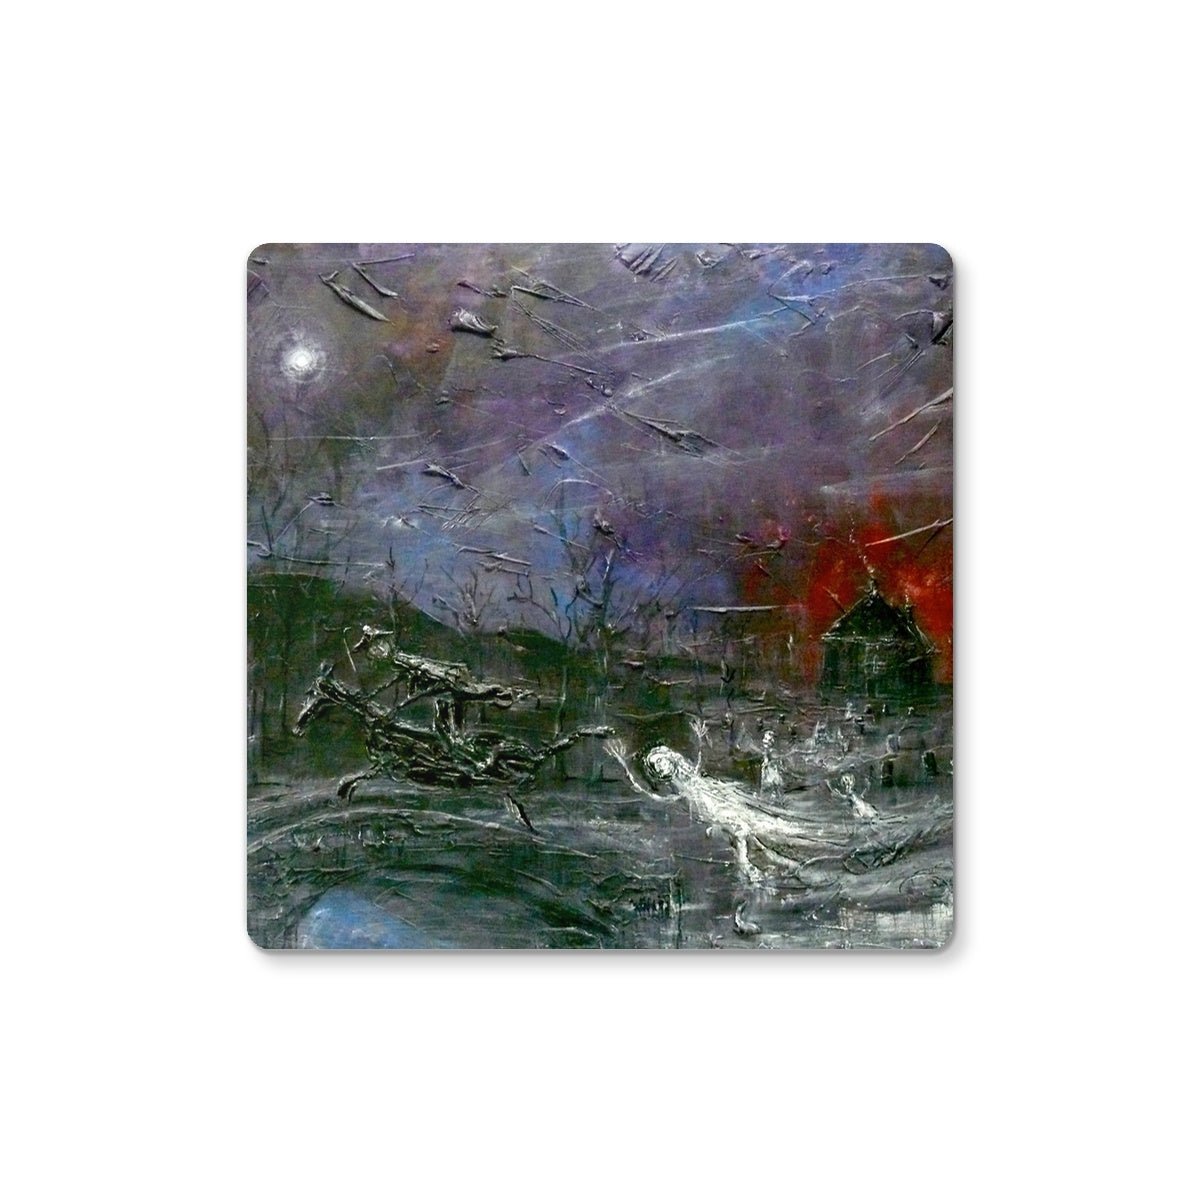 Tam O Shanter Art Gifts Coaster-Coasters-Abstract & Impressionistic Art Gallery-4 Coasters-Paintings, Prints, Homeware, Art Gifts From Scotland By Scottish Artist Kevin Hunter